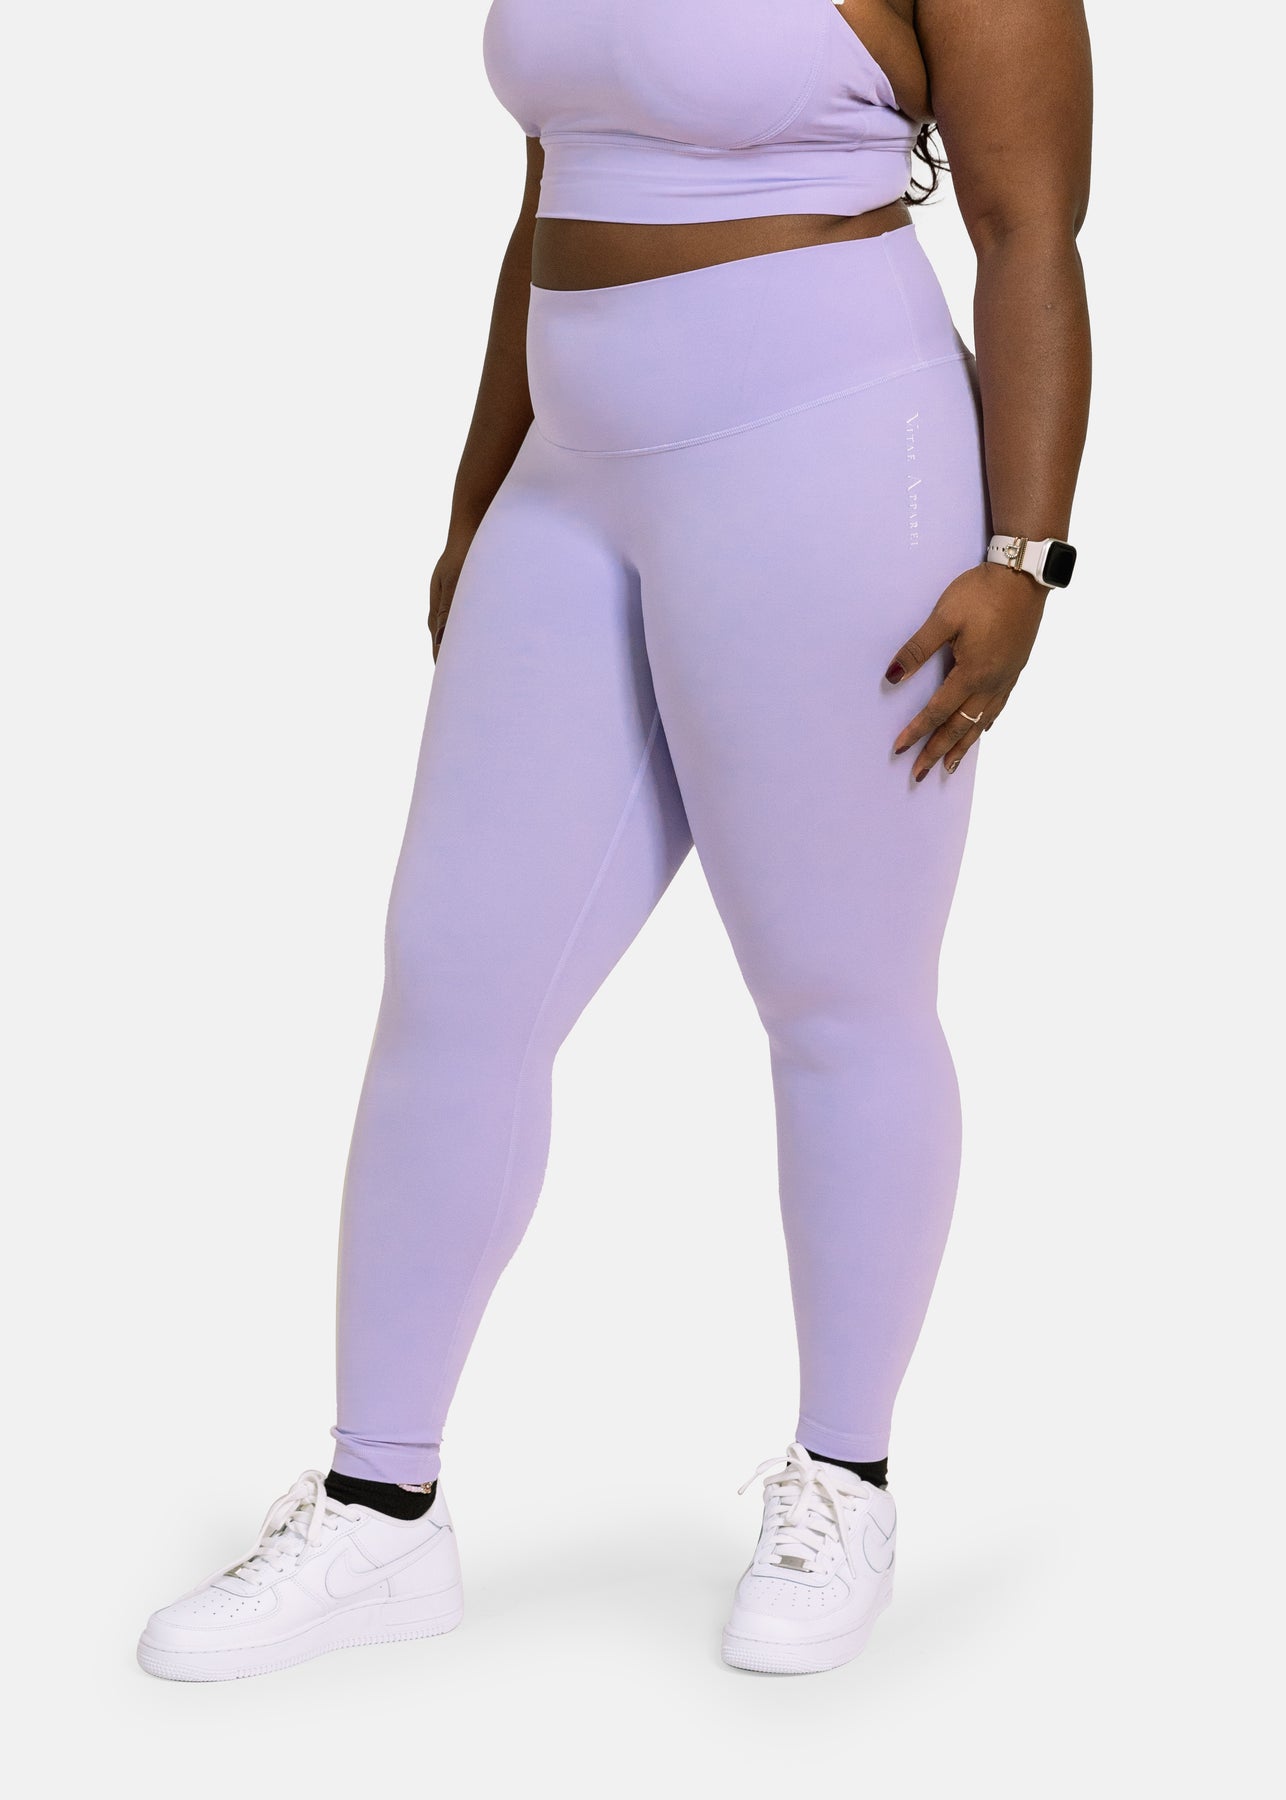 Ultra Violet Satin Material Leggings by taiche